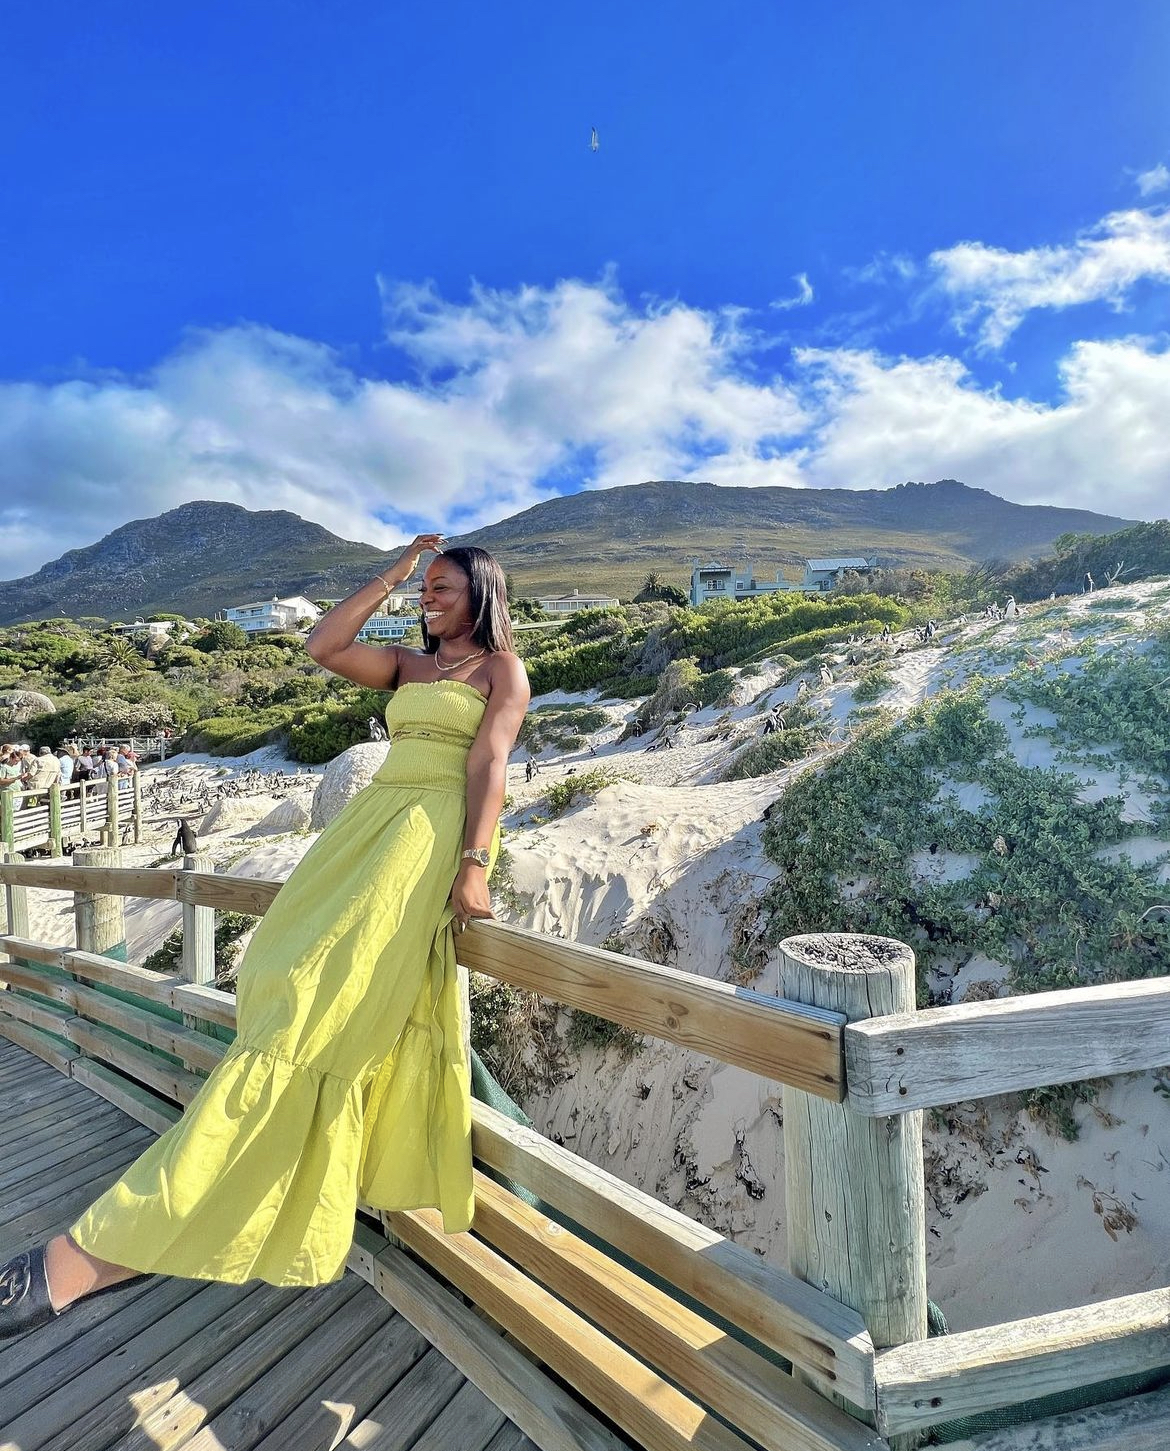 Experiencing Cape Town's awesome beauty